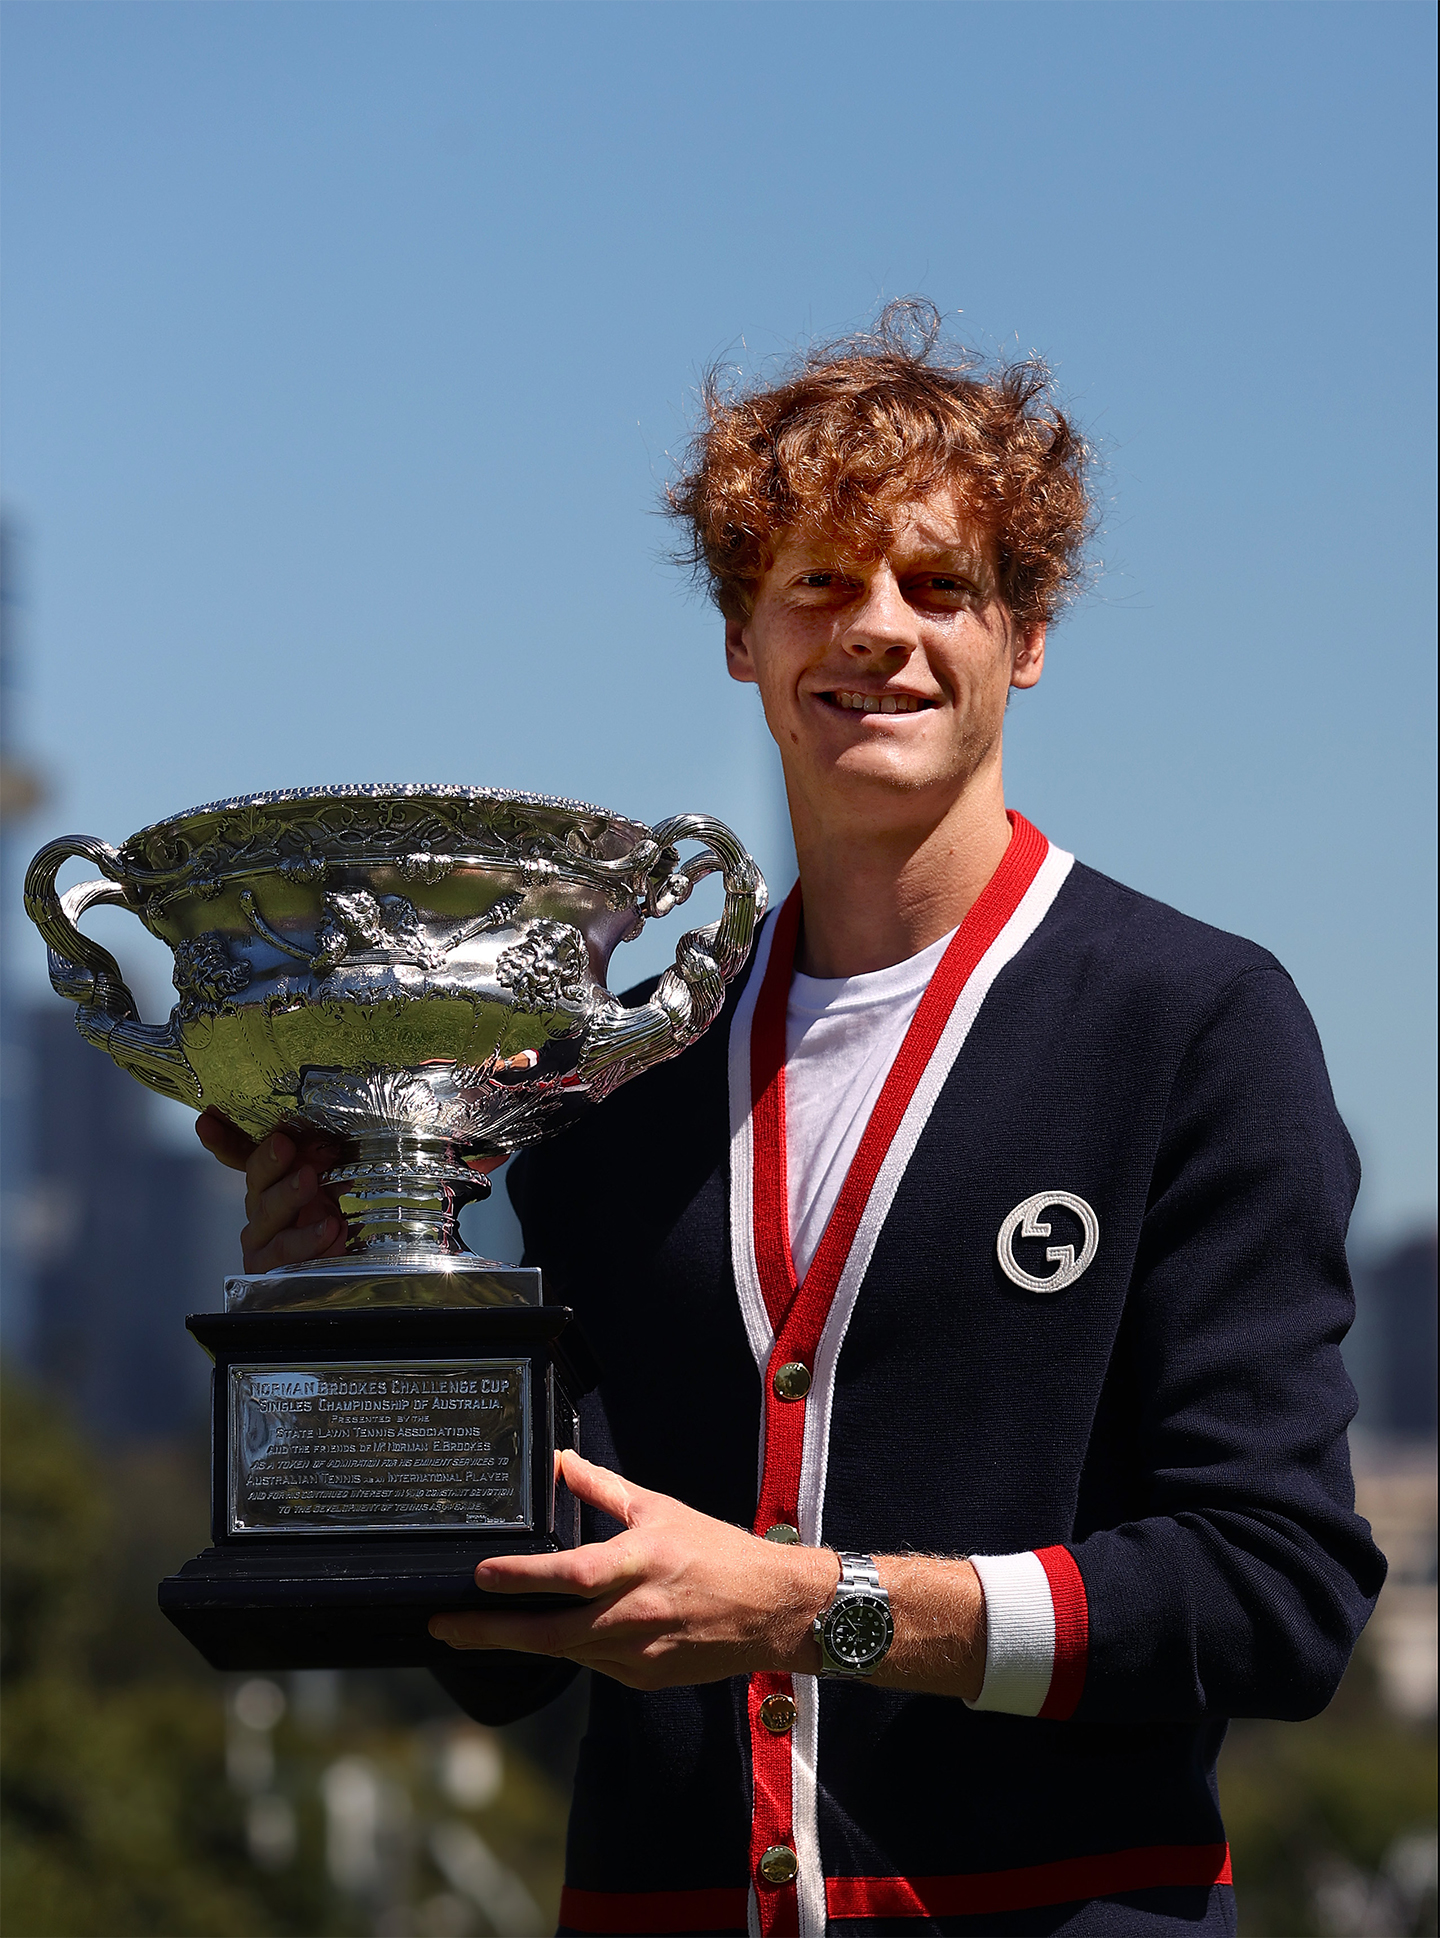 Jannik Sinner sported a Gucci cardigan while posing with the Norman Brookes Challenge Cup after winning the 2024 Australian Open Final at the Royal Botanic Gardens in Melbourne, Australia. Courtesy of Gucci. Image courtesy of Getty Images